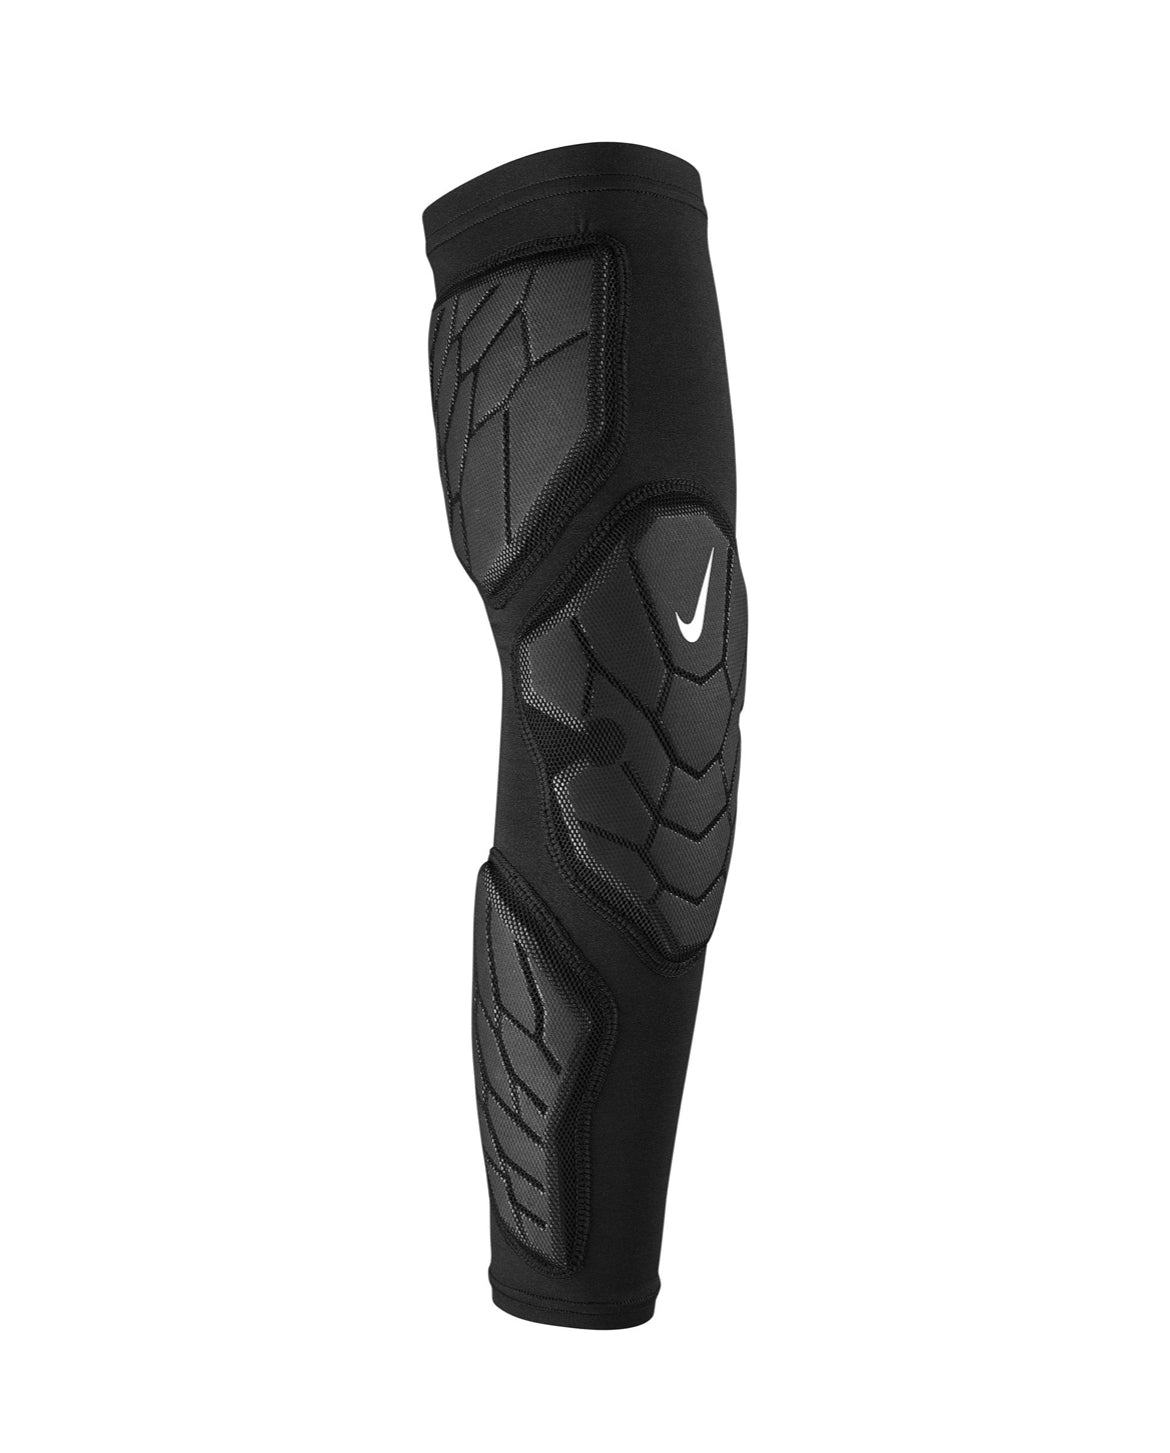 NIKE Football Amplified Padded Forearm Sleeve Black Small 2 in pack